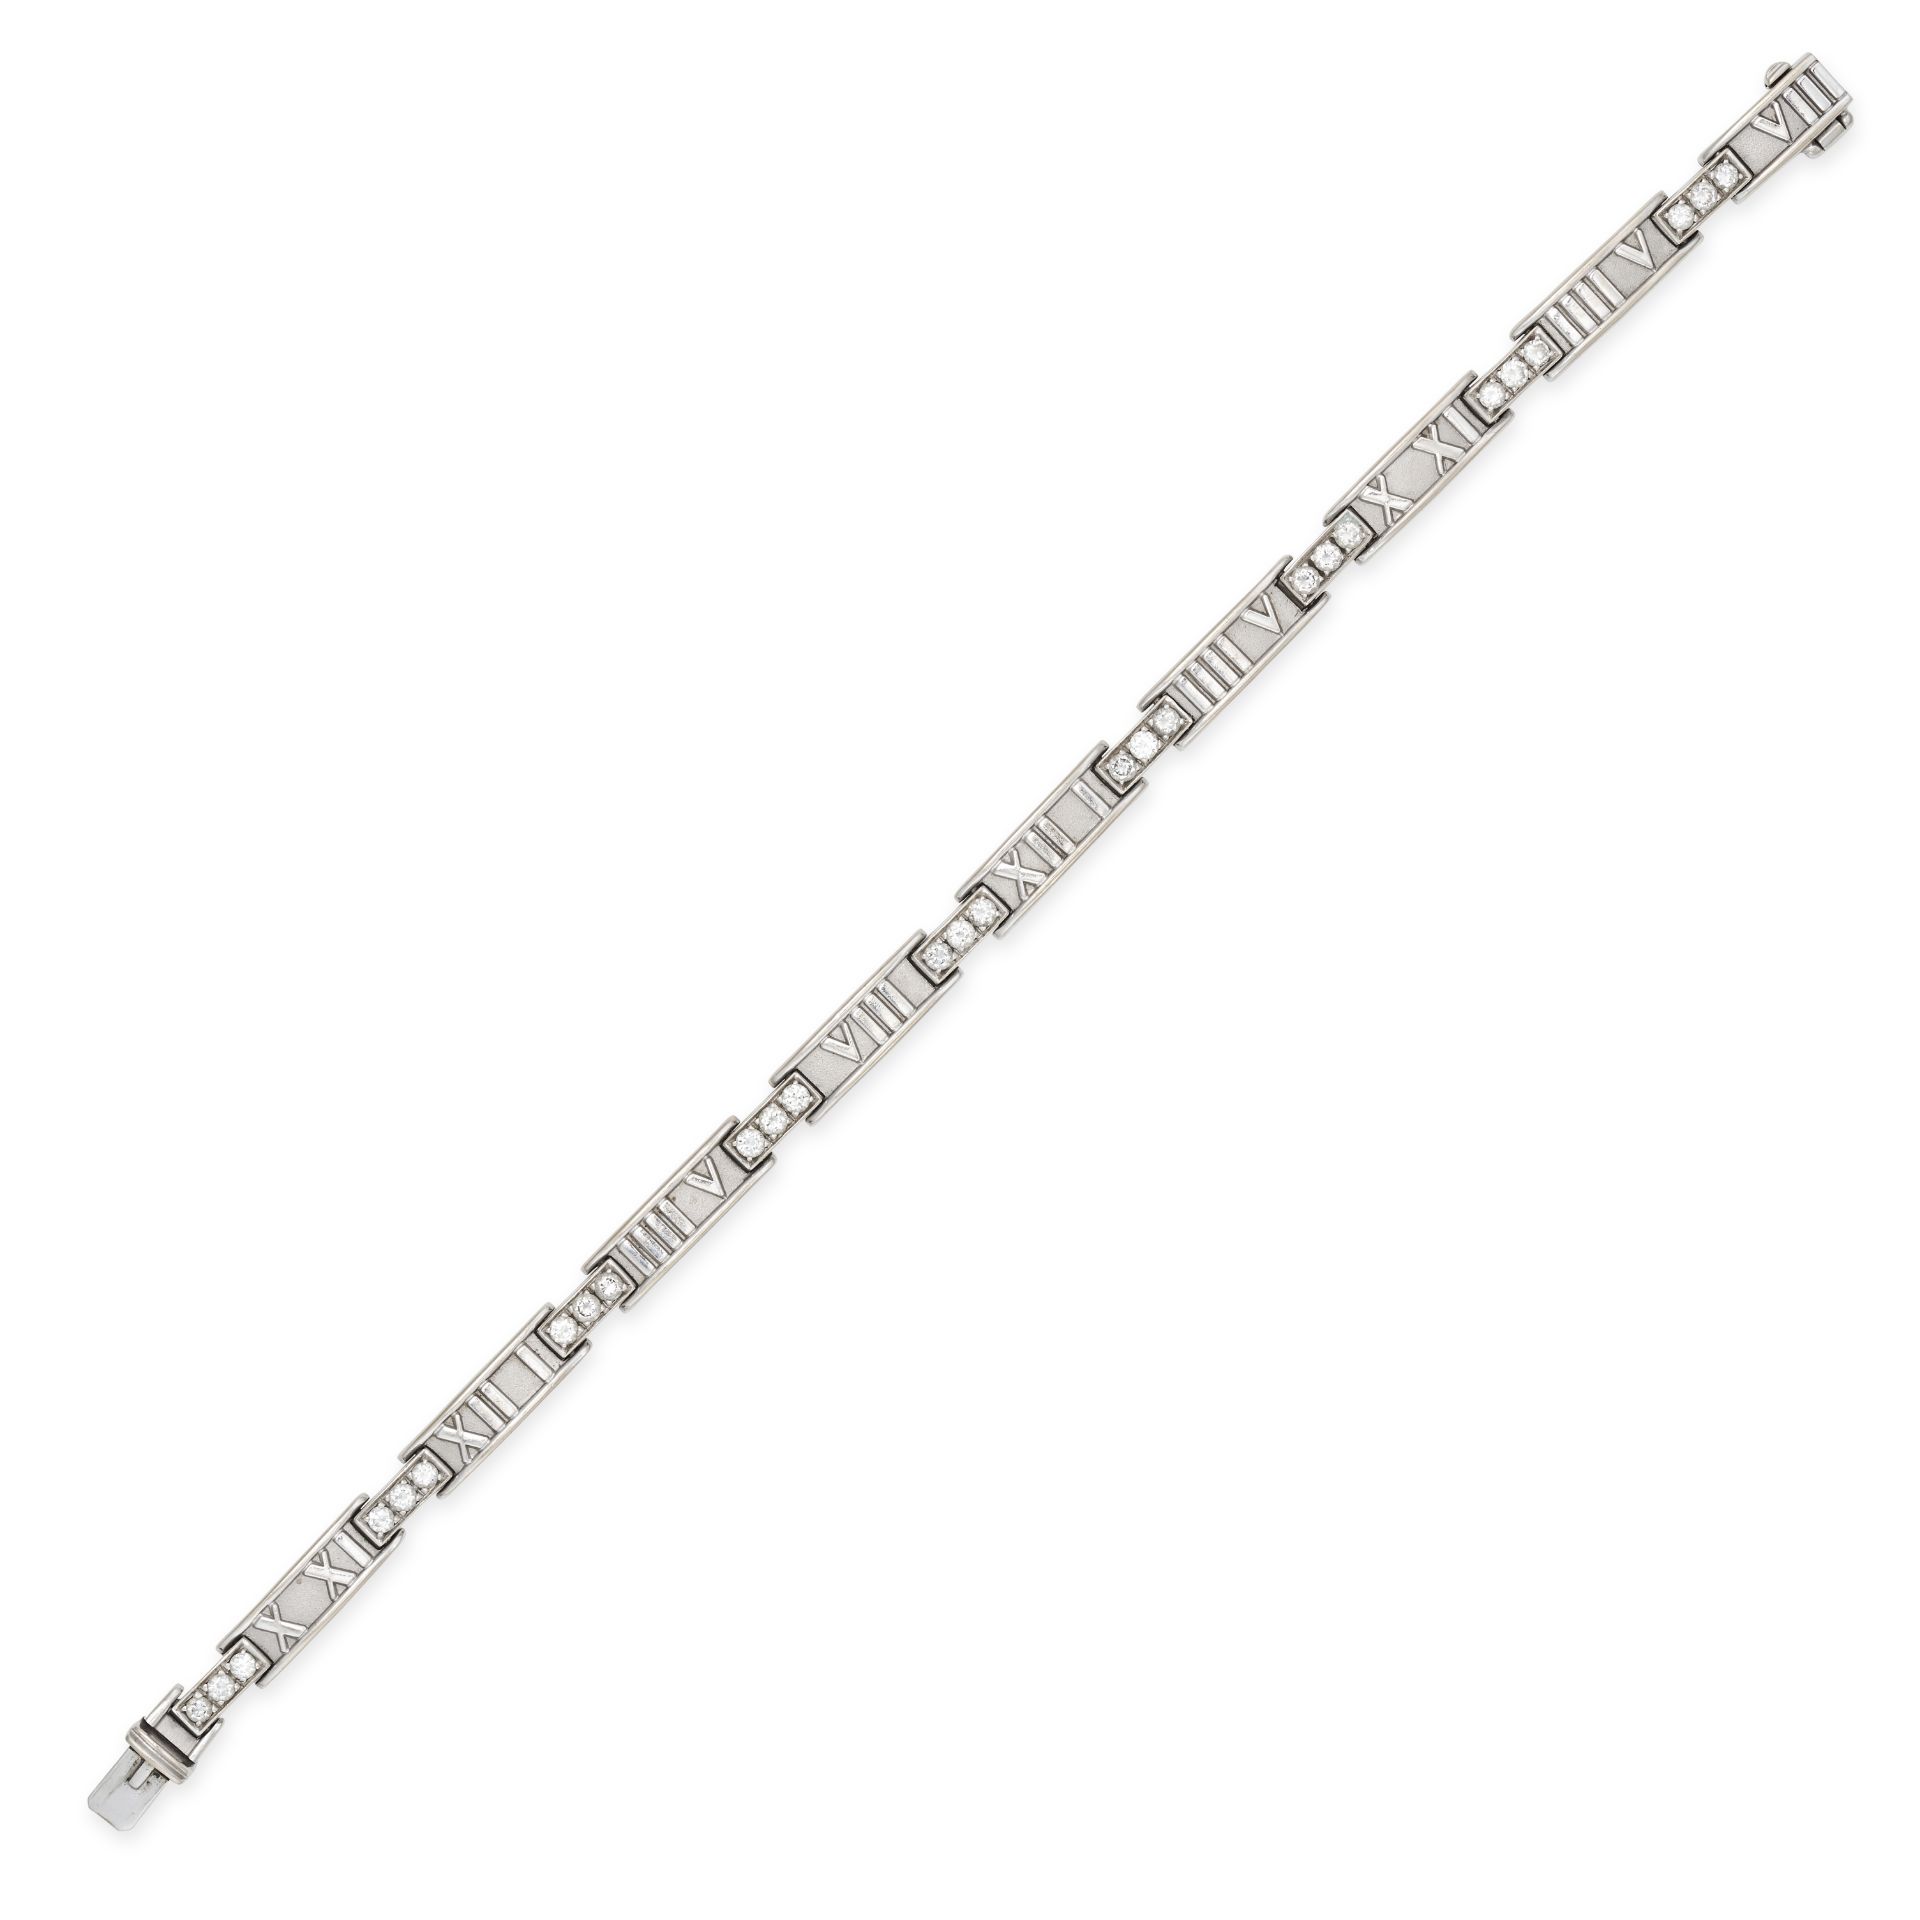 TIFFANY & CO., A DIAMOND ATLAS BRACELET comprising a row of links with embossed Roman numerals, a...